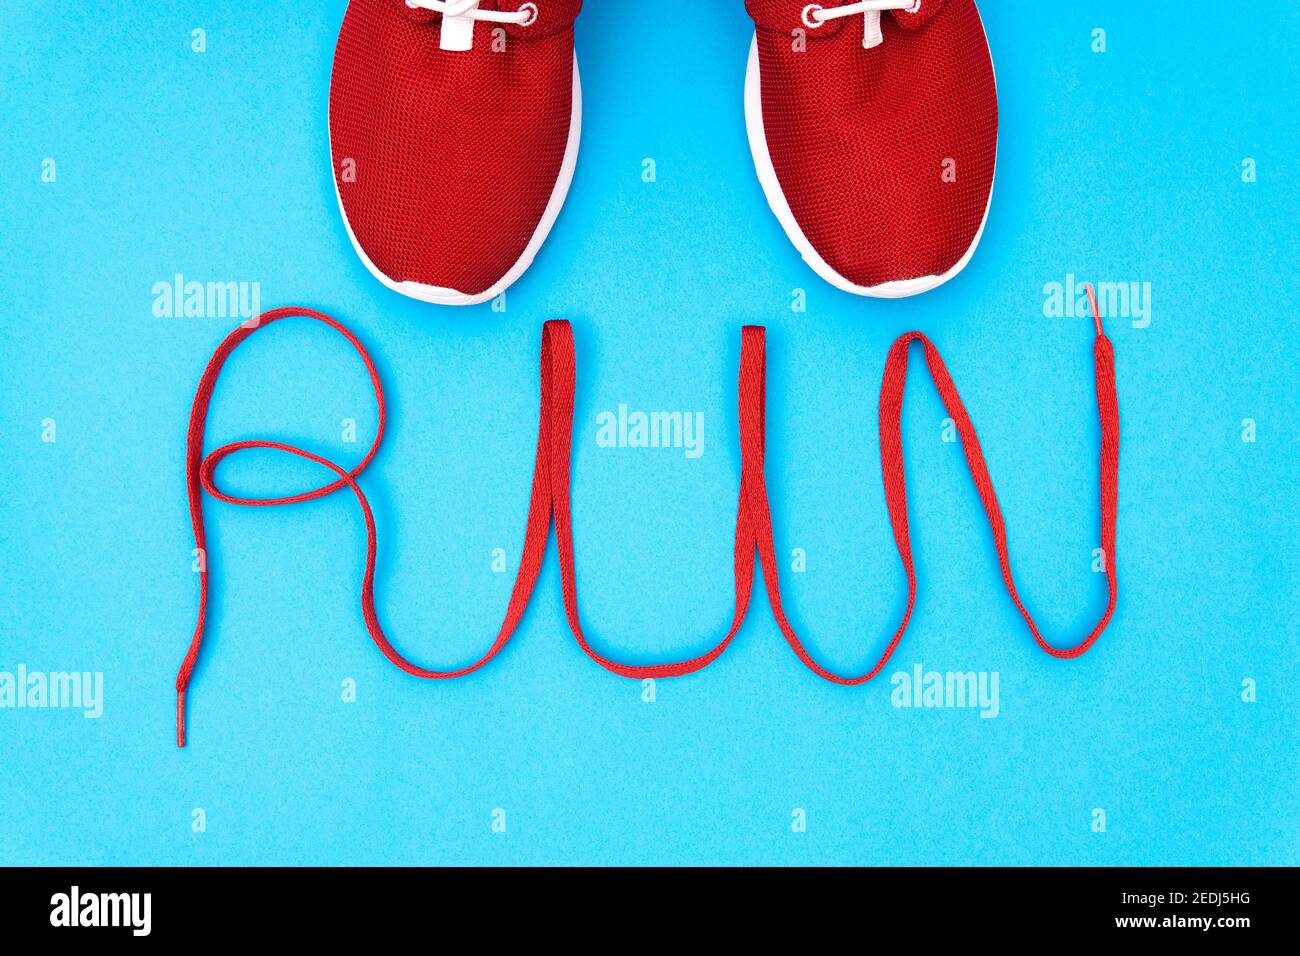 Red running sneakers and lettering 'run' made of a shoelace on a blue background. Creative flat lay, studio shot. Stock Photo